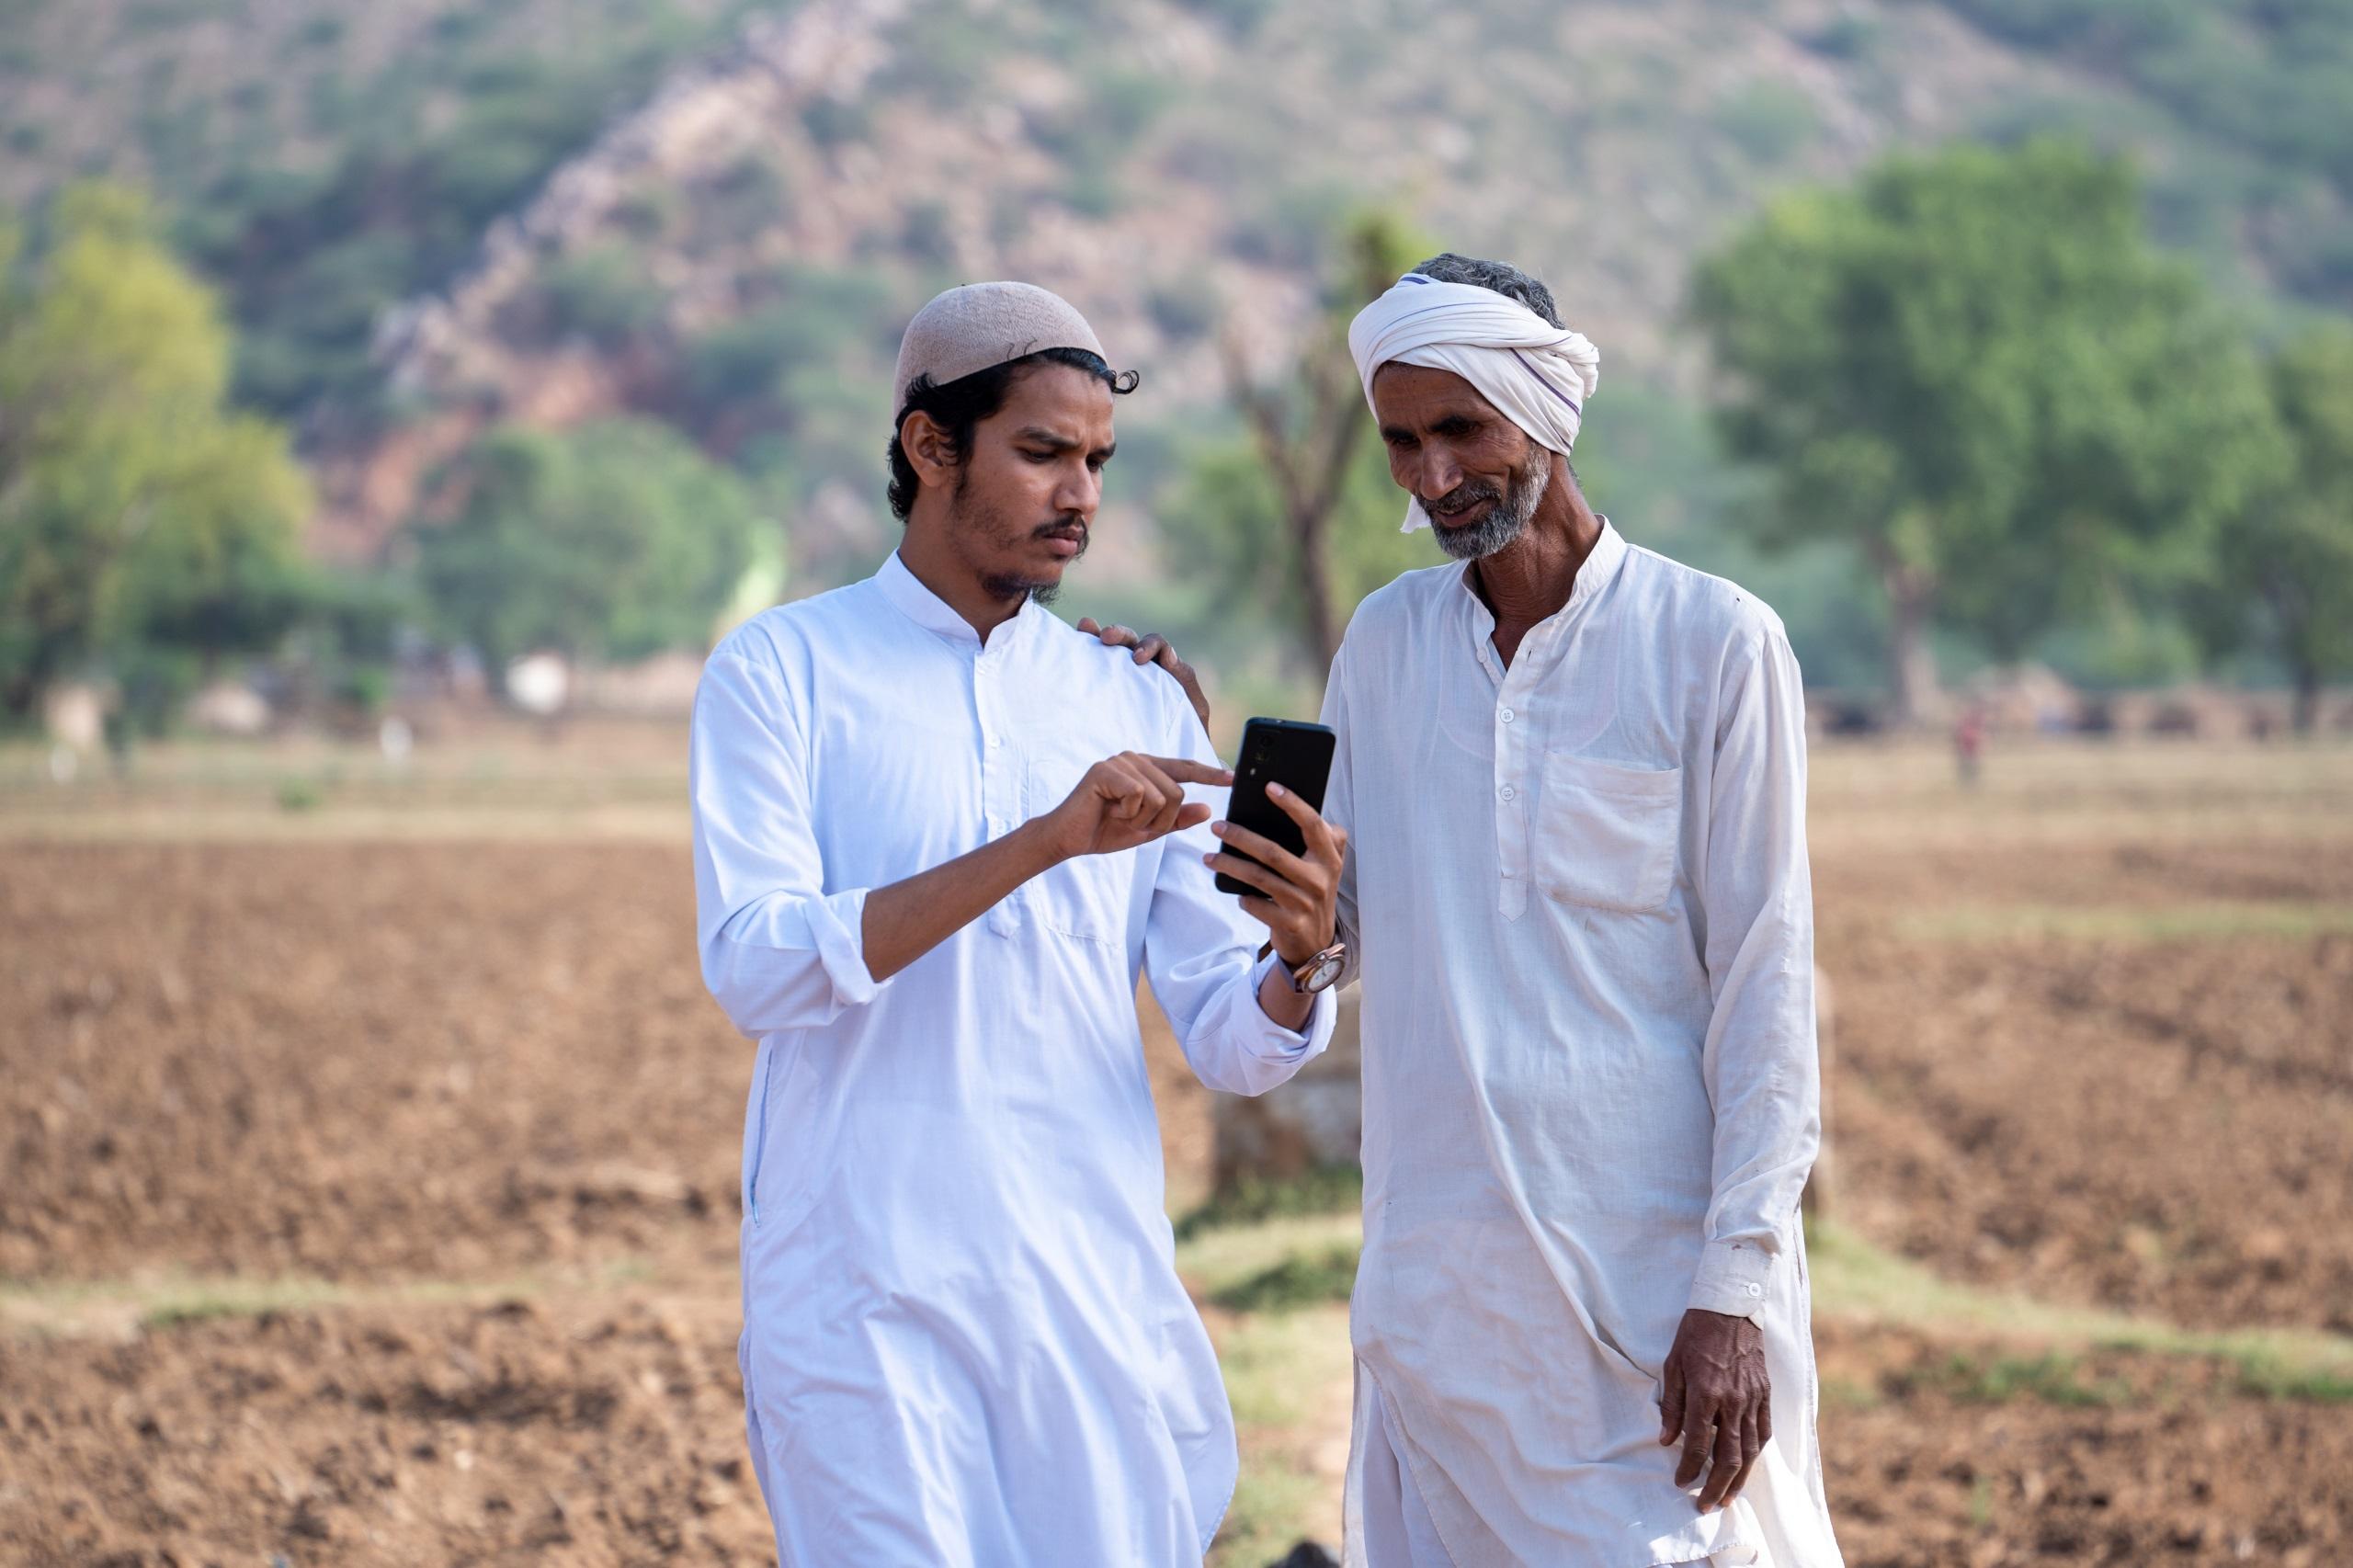 villager using phone, Make Use of the Potential of Digital Marketing